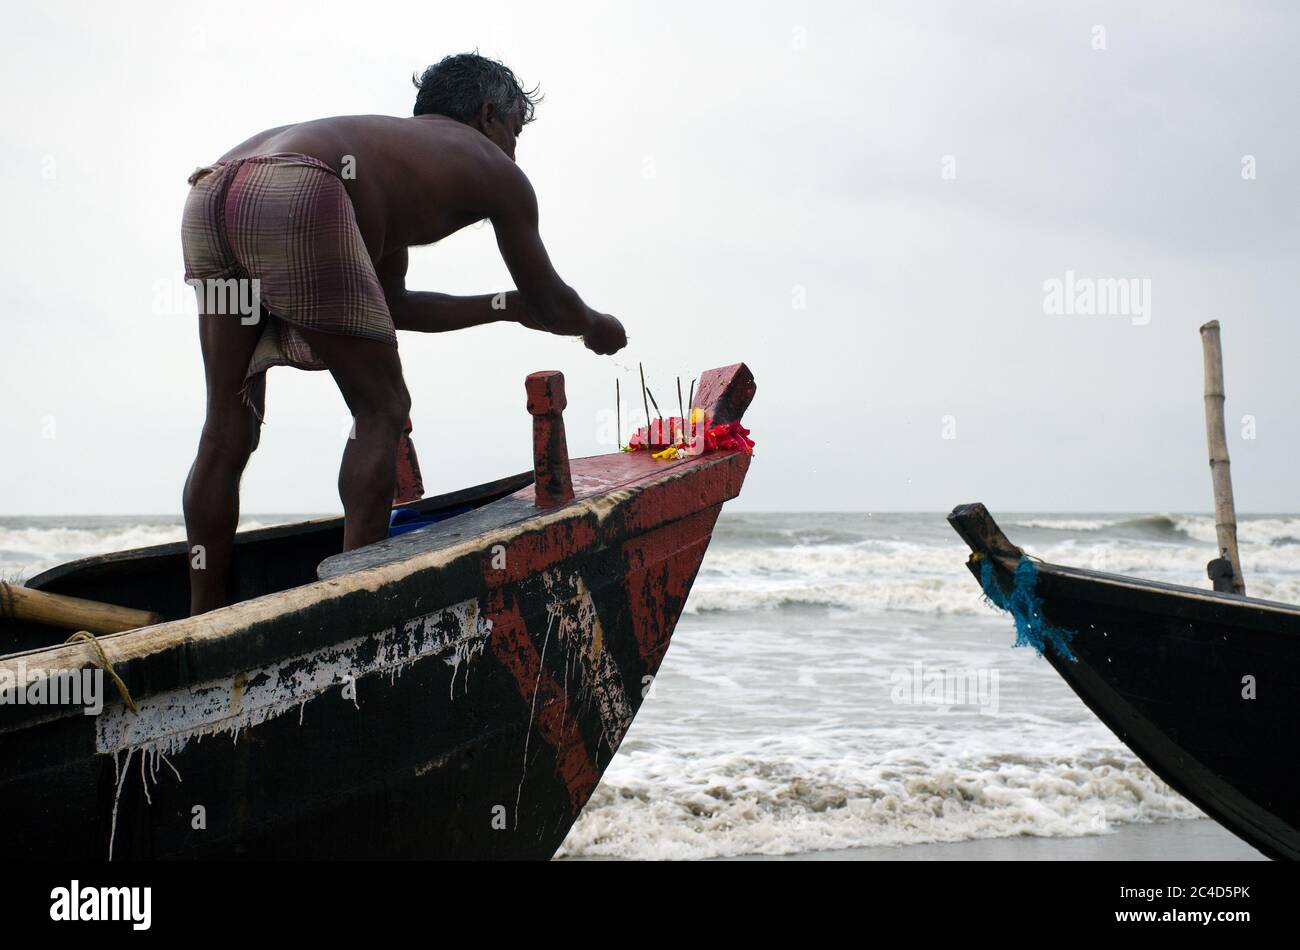 mandermoni sea beach west bengal india on may 29th 2018 : Worship of the fishing boat on Mandermoni beach. This is a fisherman's ritual before going f Stock Photo